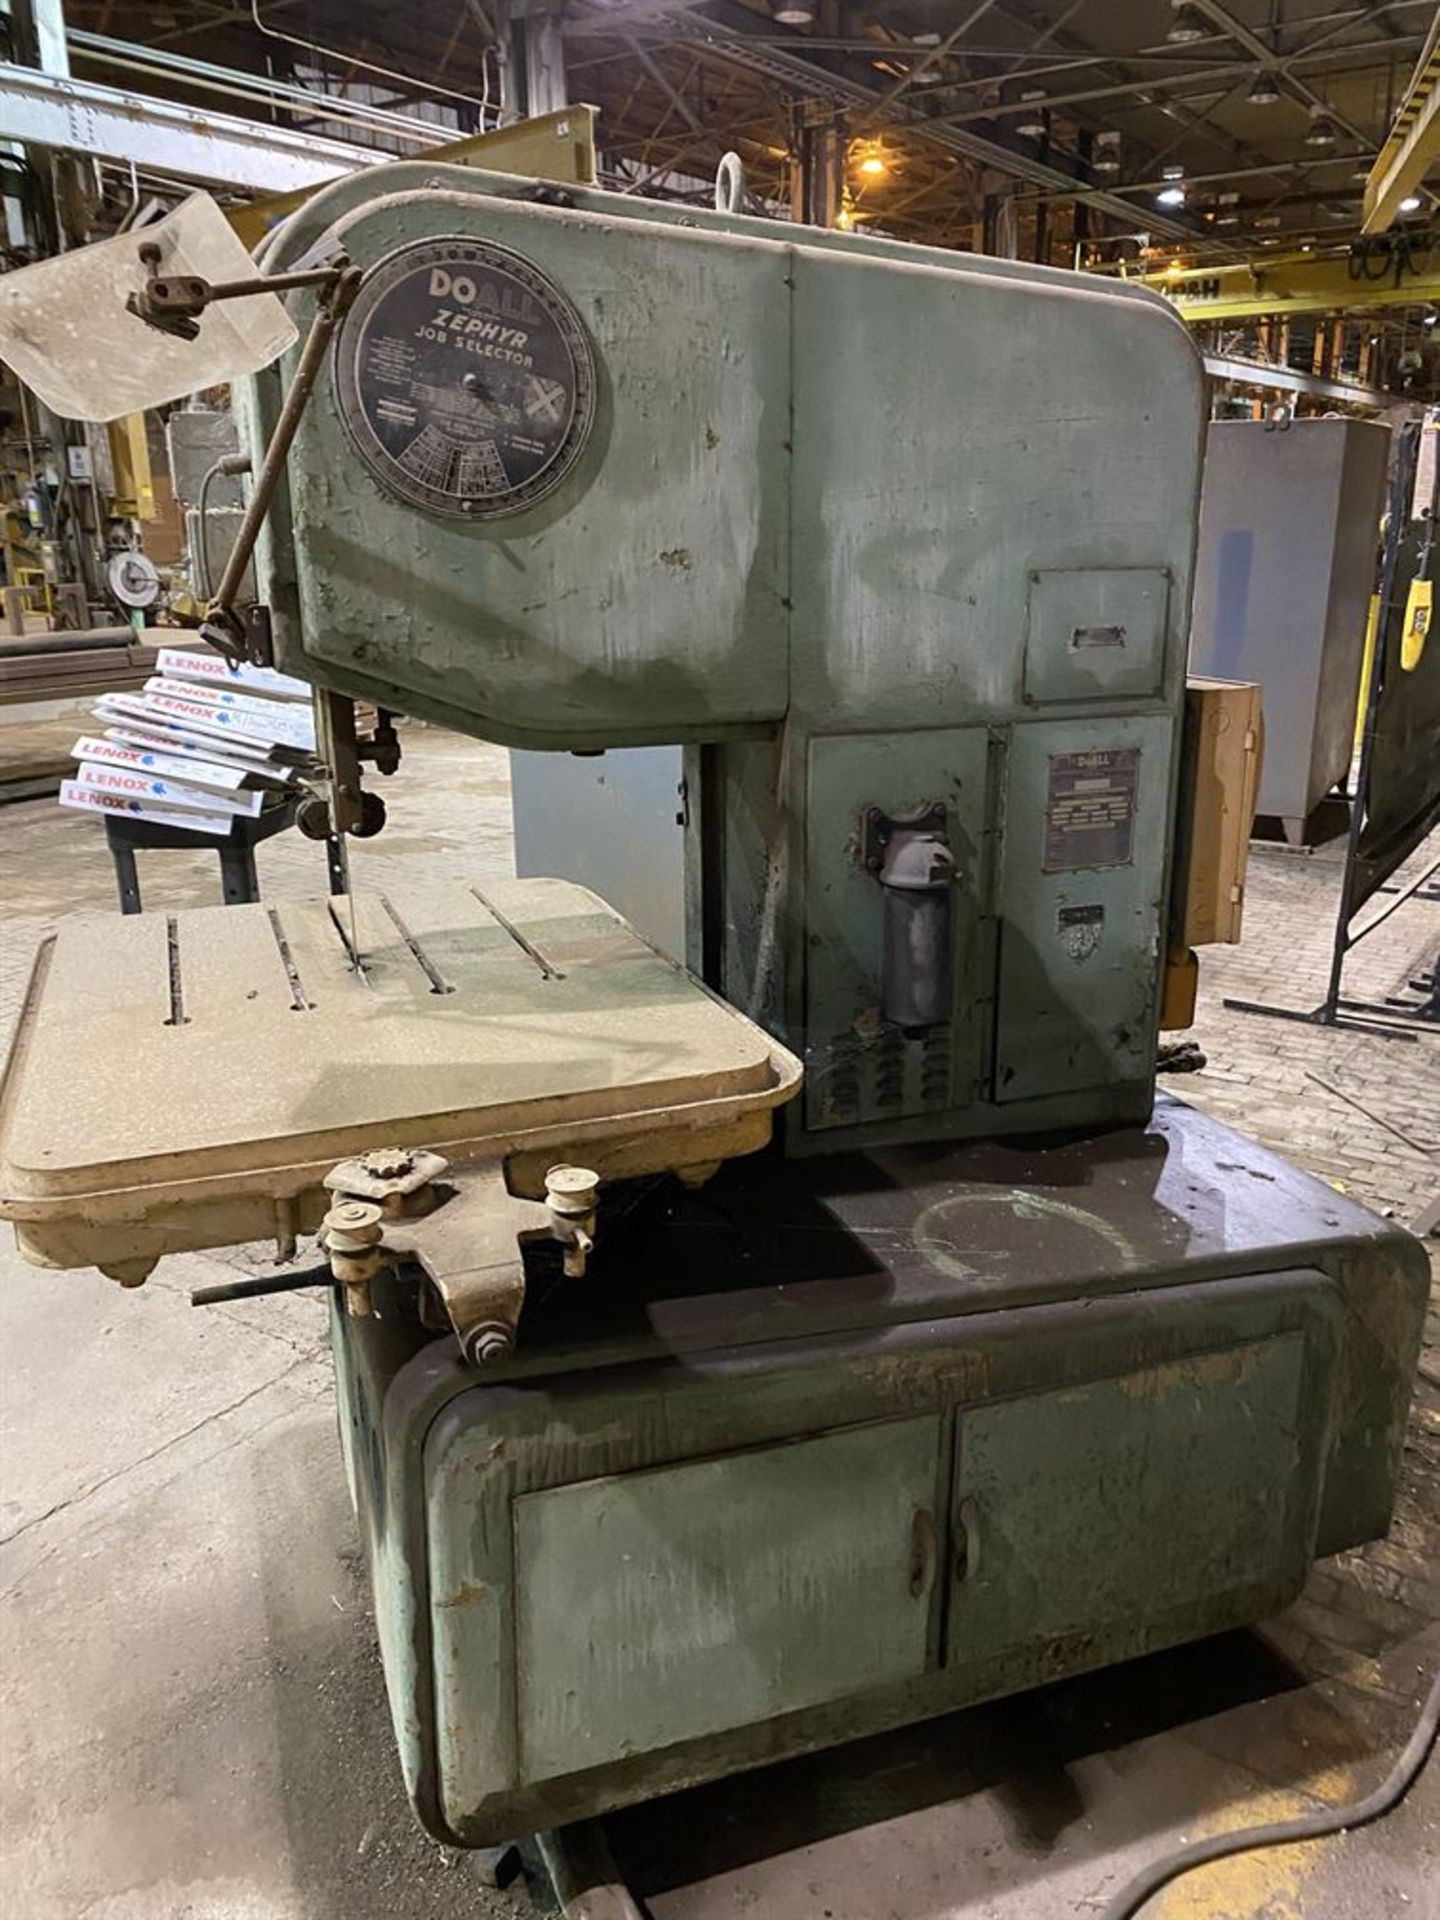 DOALL MP20 Vertical Bandsaw, s/n 3252645 (Location: Machine Shop) - Image 3 of 6